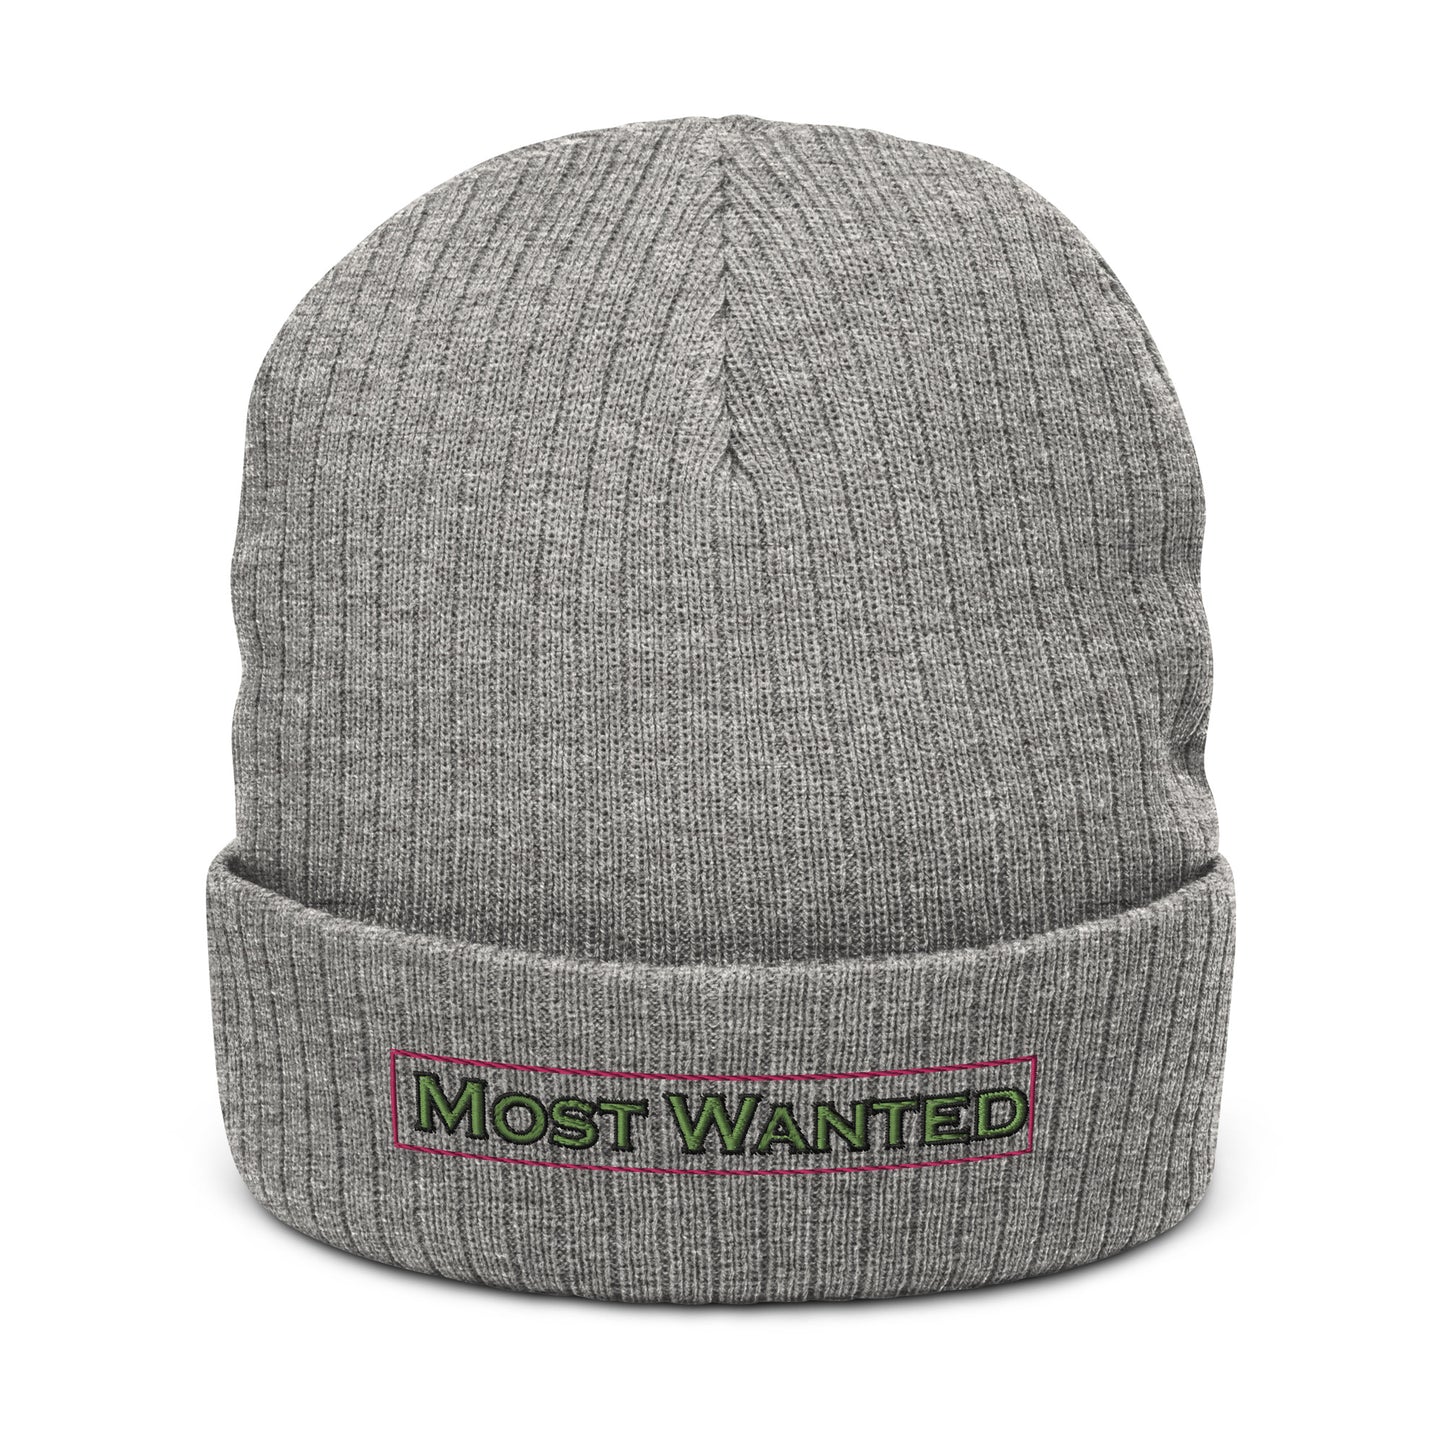 Ribbed knit beanie (Most Wanted)